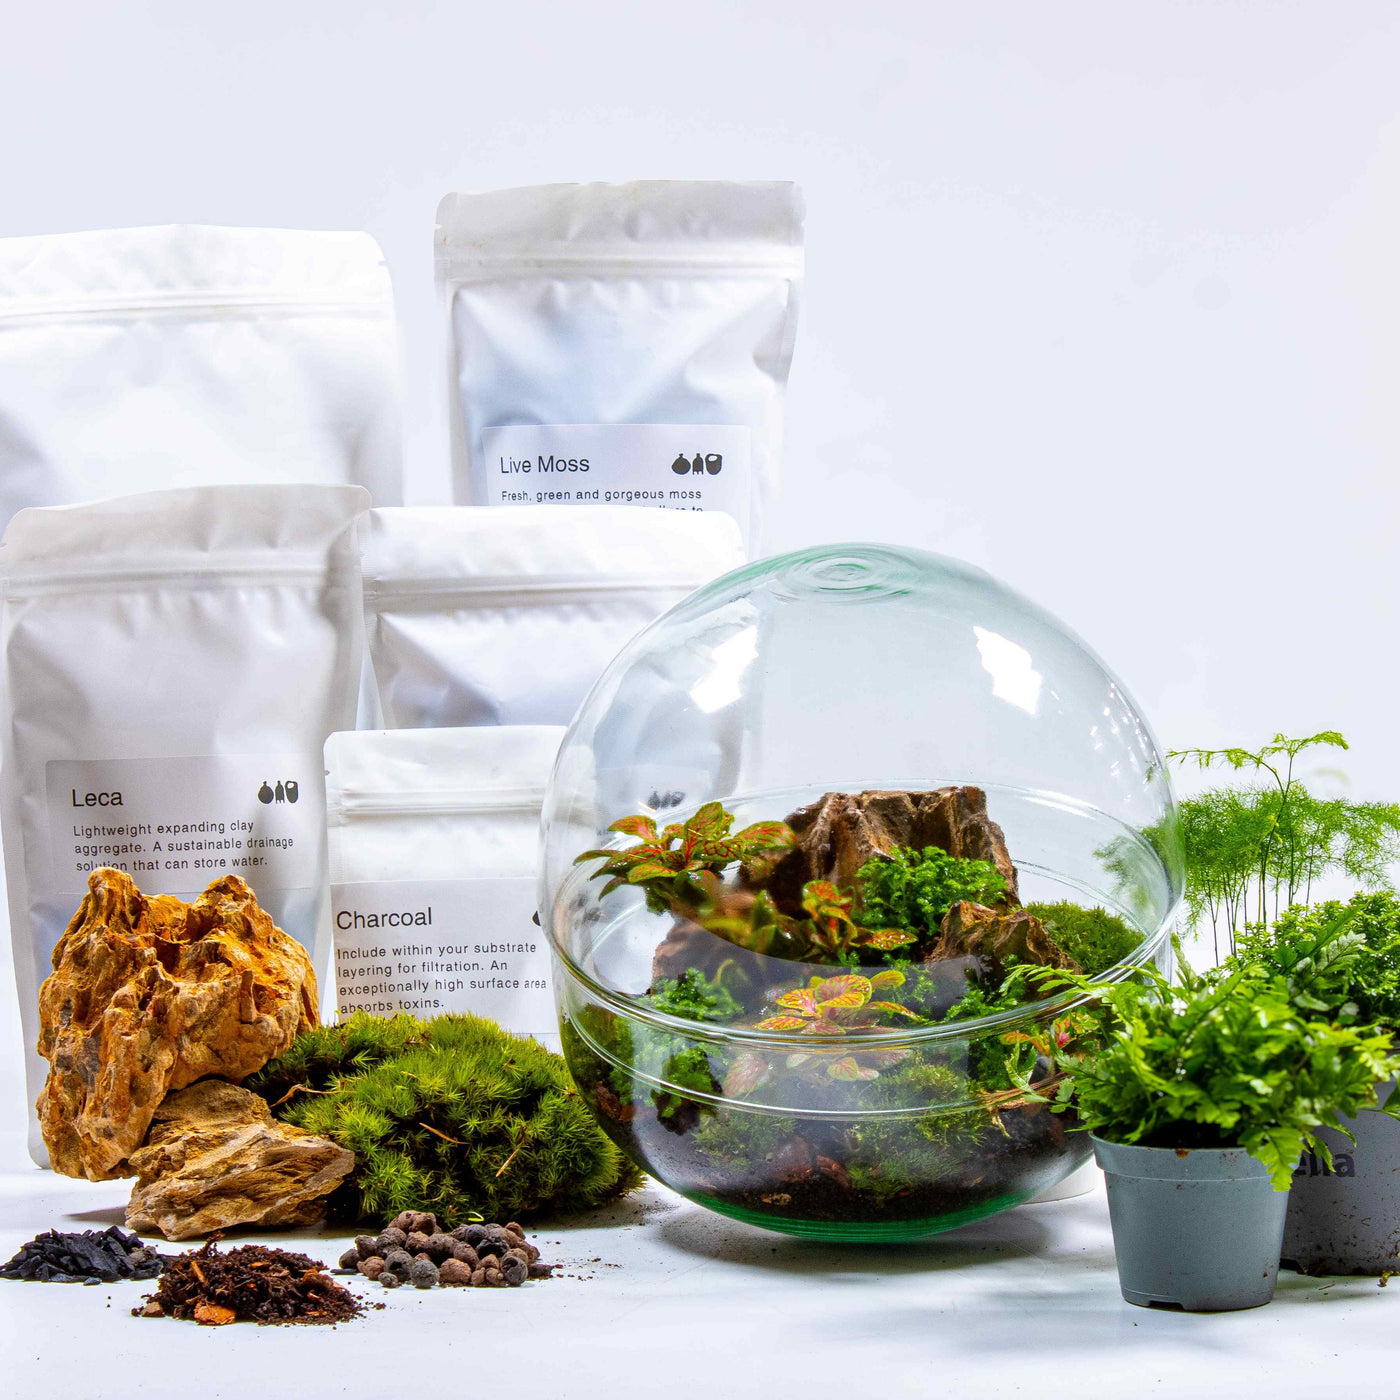 Make your own terrarium! Tropical closed ecosystem kit